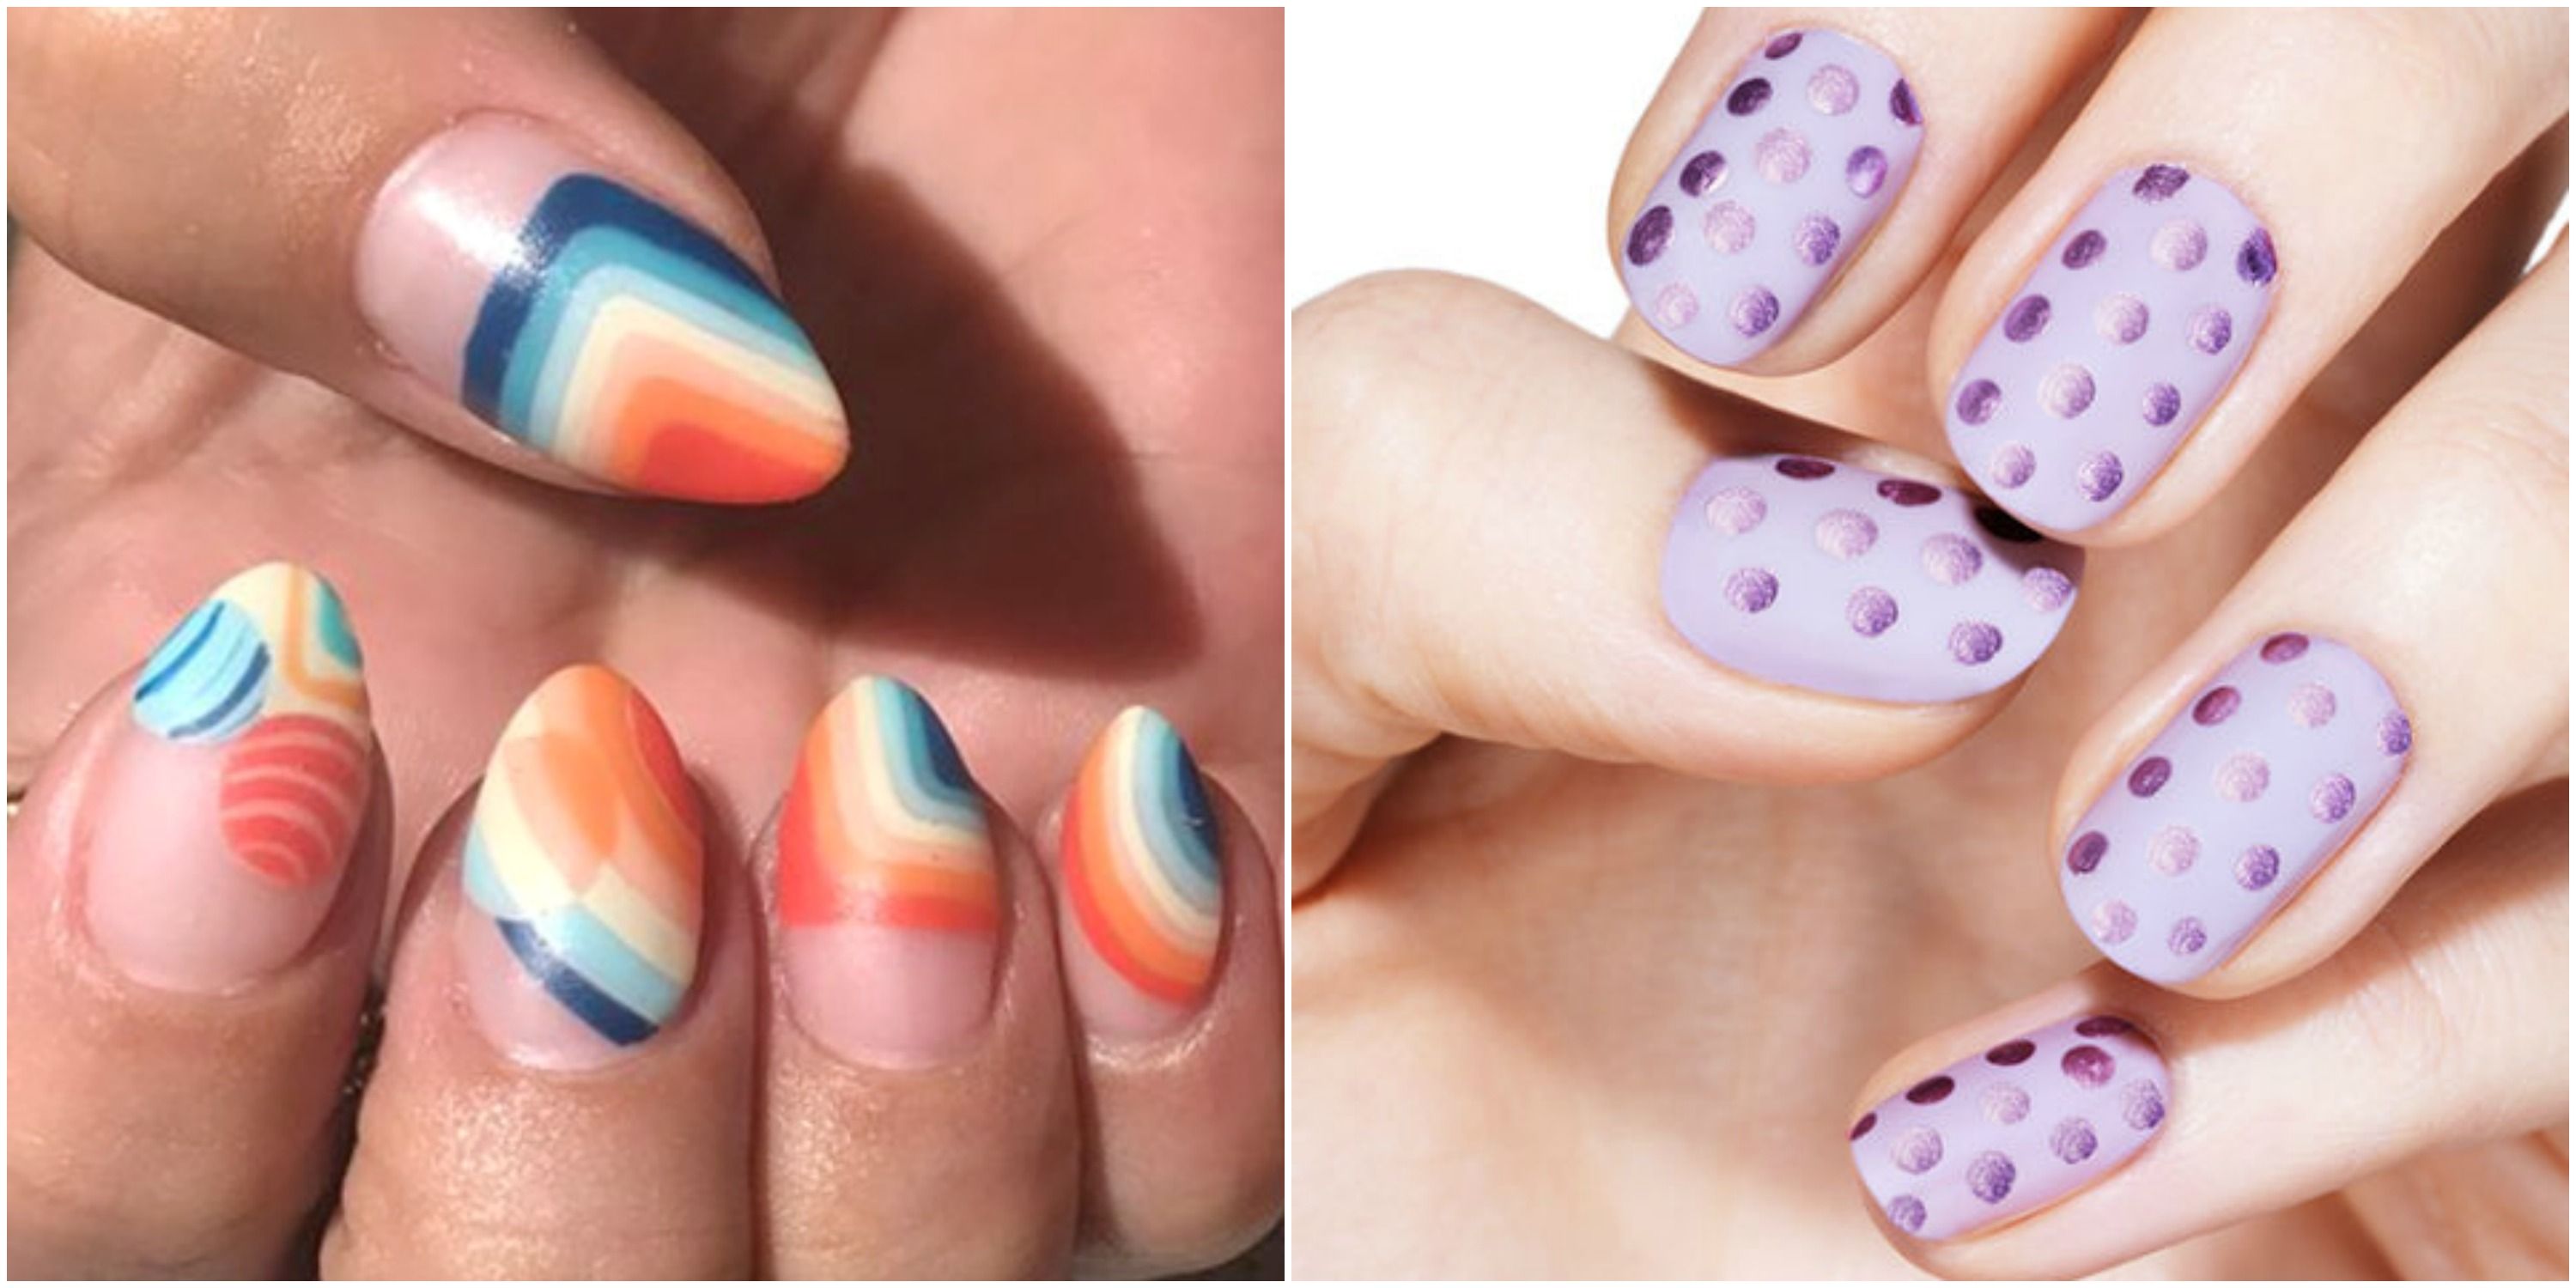 8. 25 Cute and Creative Matte Nail Designs for Summer - wide 10